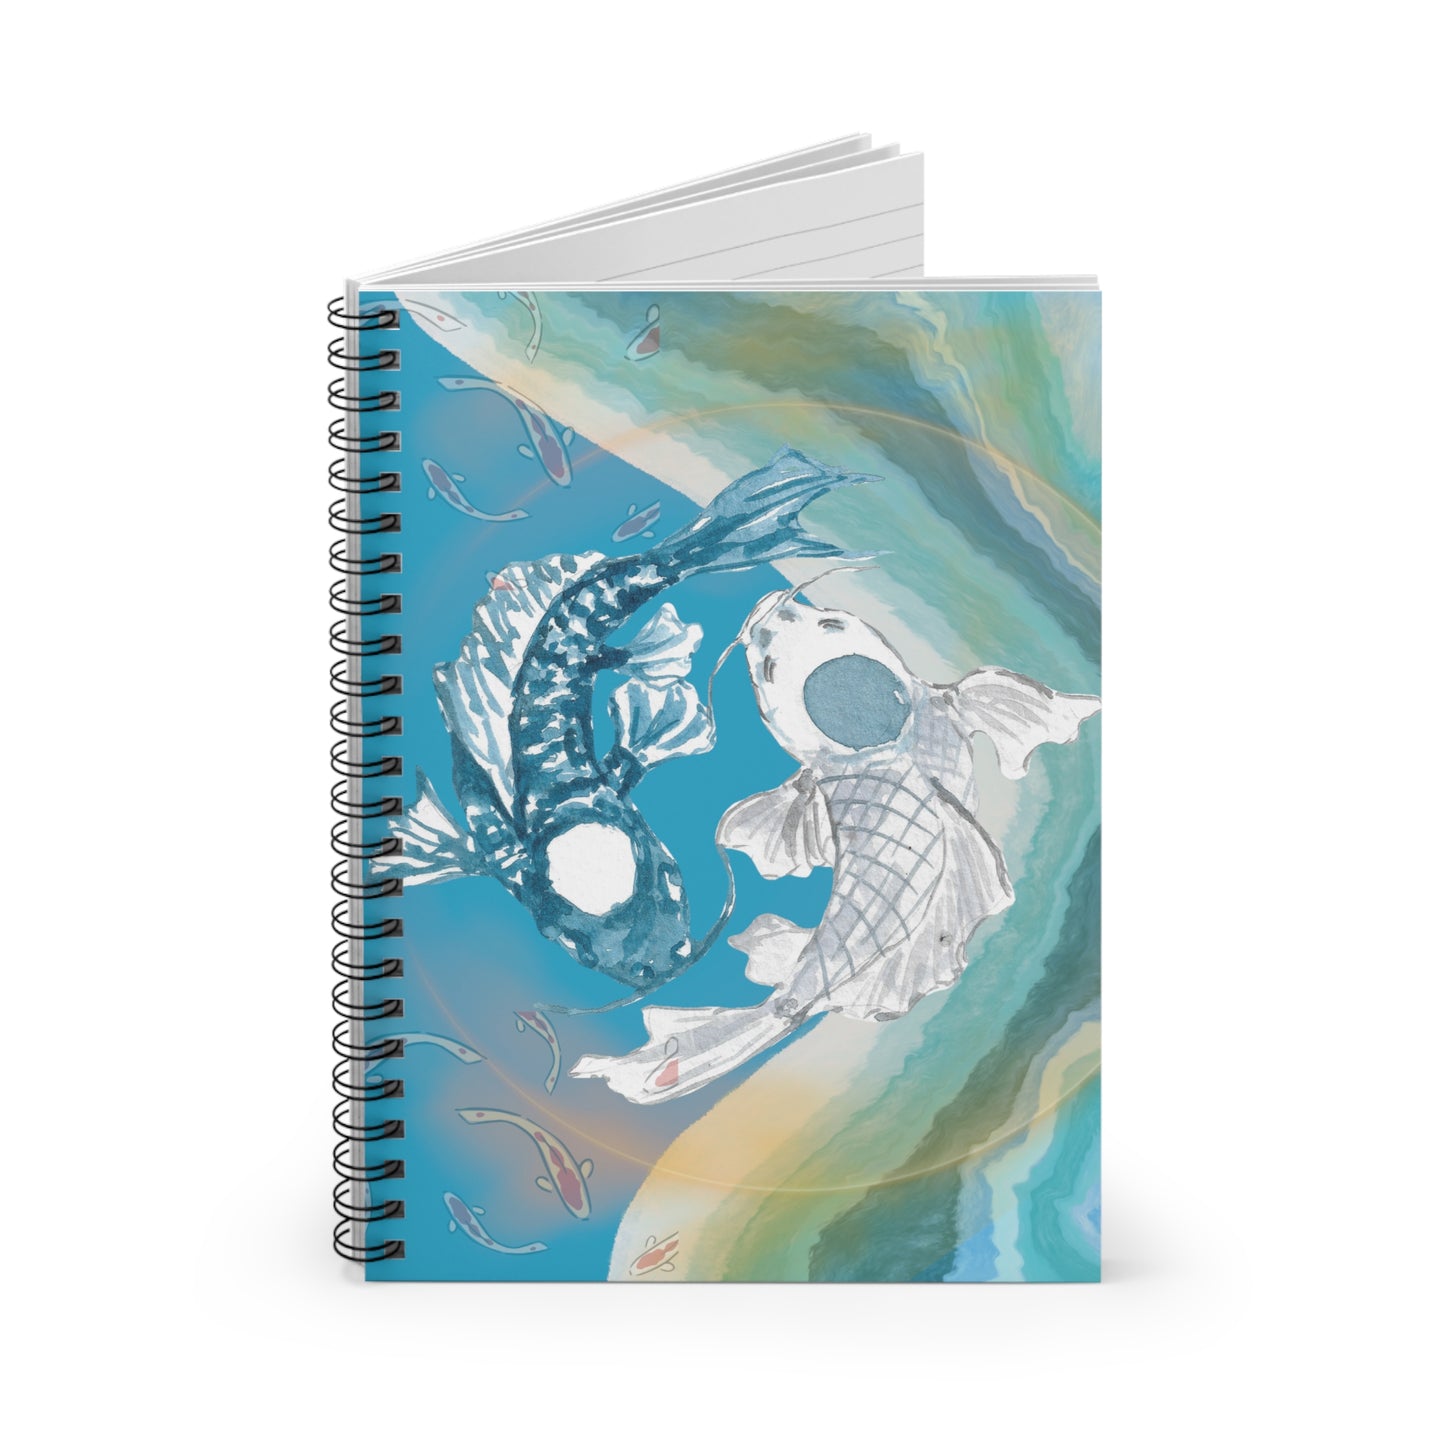 Playing Koi: Spiral Notebook - Log Books - Journals - Diaries - and More Custom Printed by TheGlassyLass